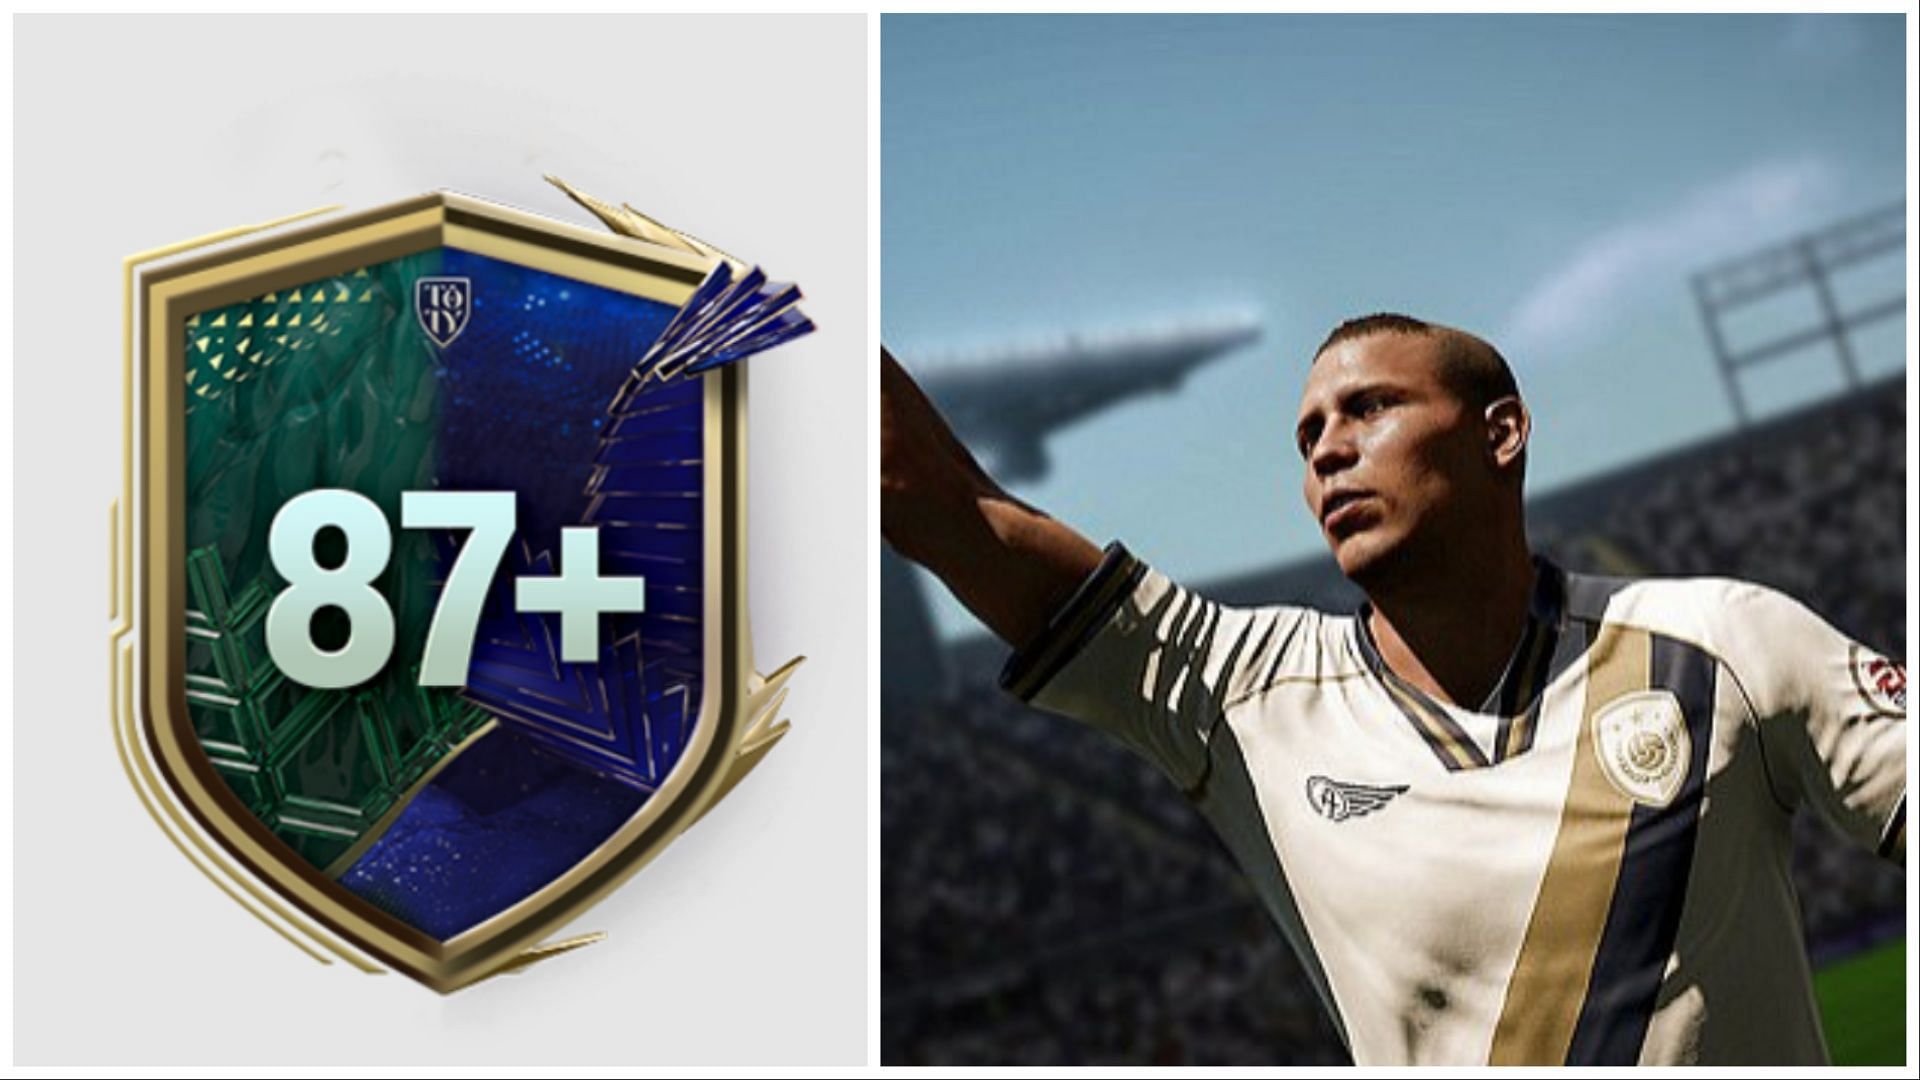 The EA FC 24 87+ Base, Winter Wildcards or Team of the Year Icon player pick is now live